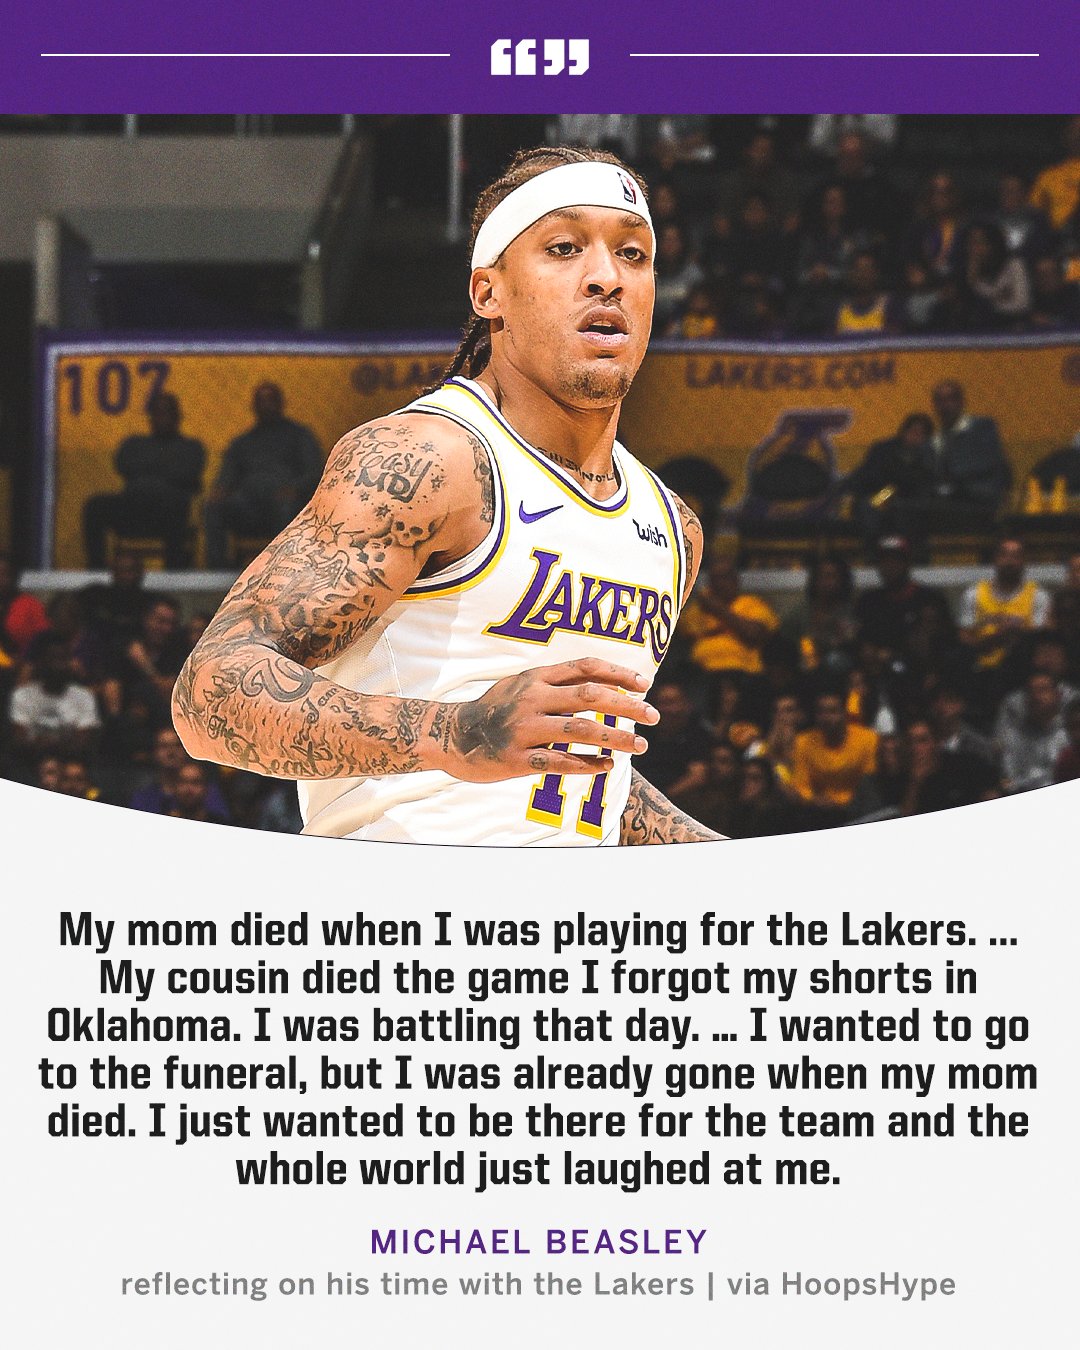 Michael Beasley: It feels great to be able to be yourself, be accepted